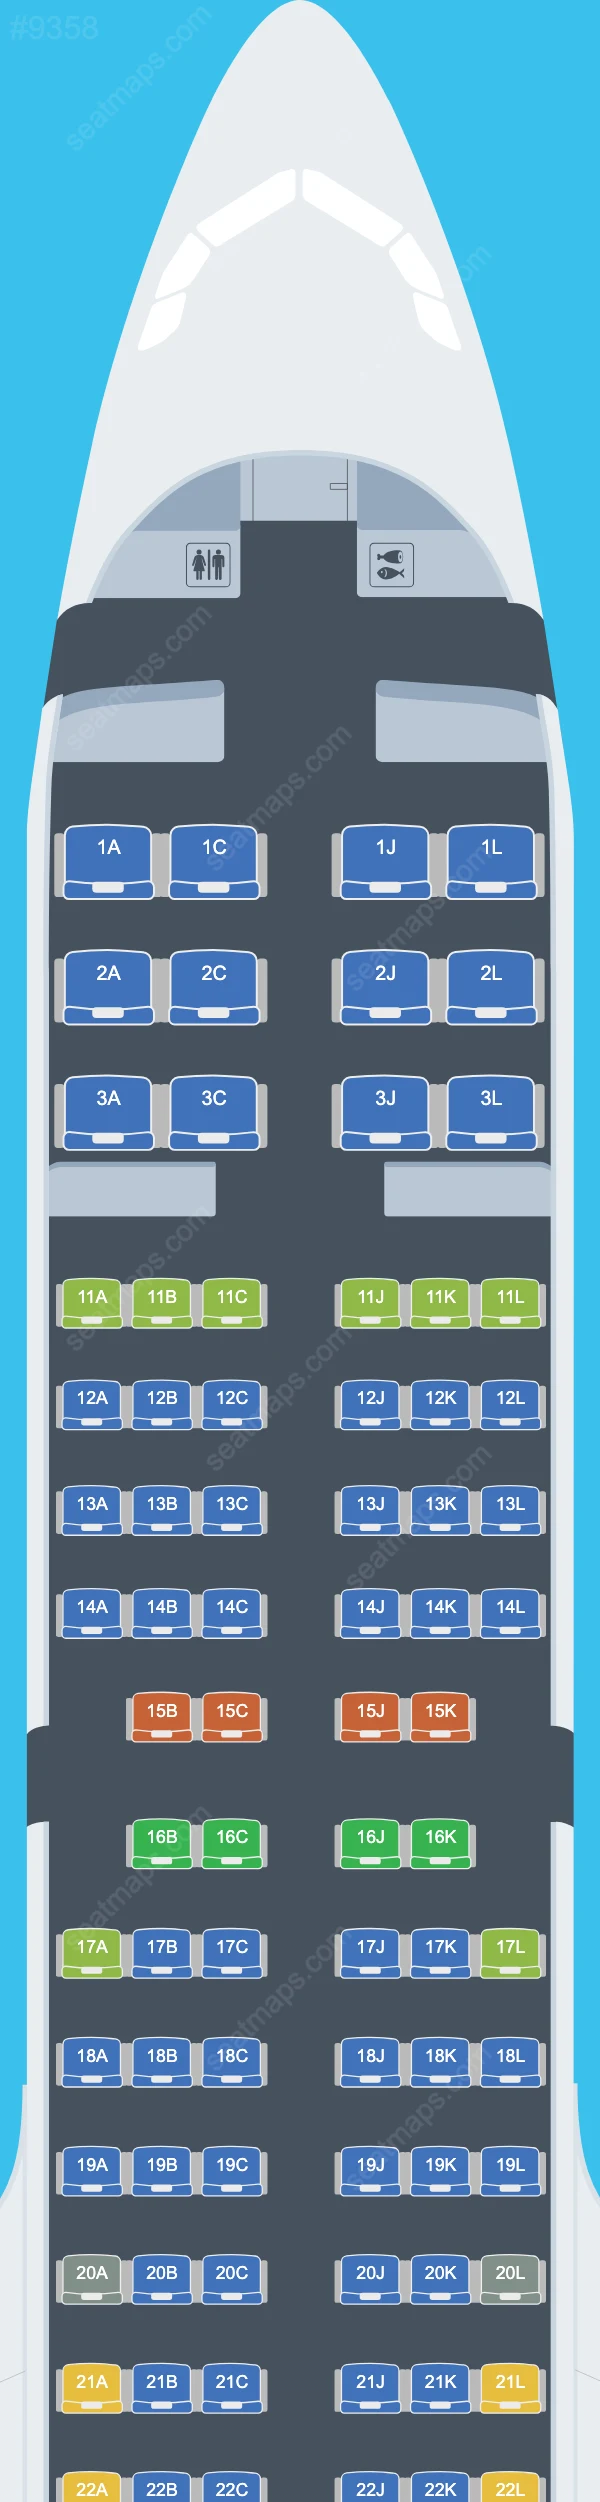 Air China Airbus A321 Seat Maps A321-200neo